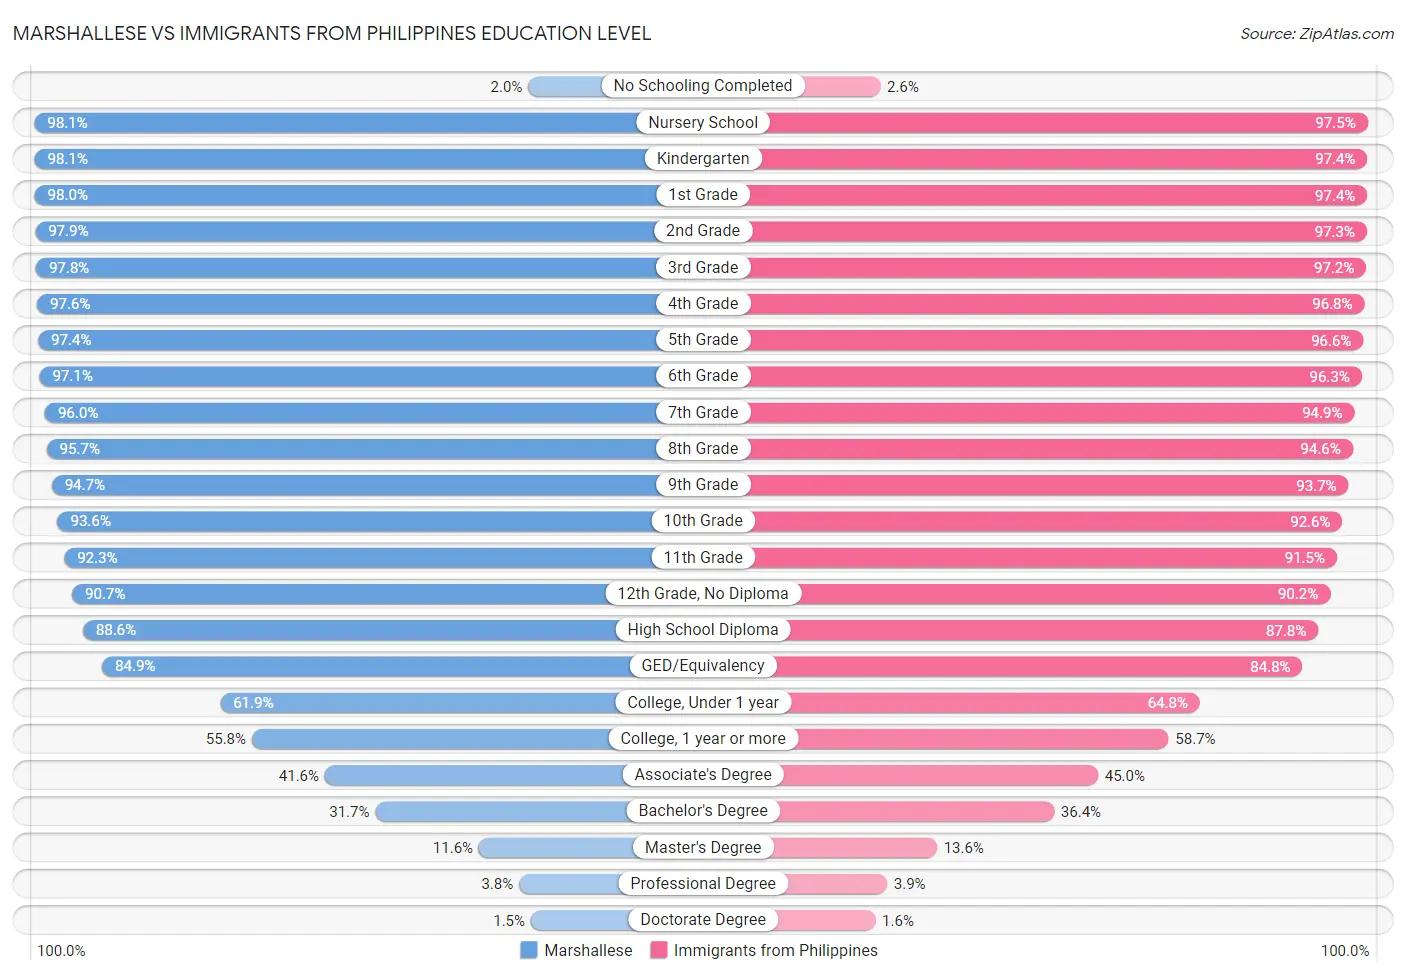 Marshallese vs Immigrants from Philippines Education Level